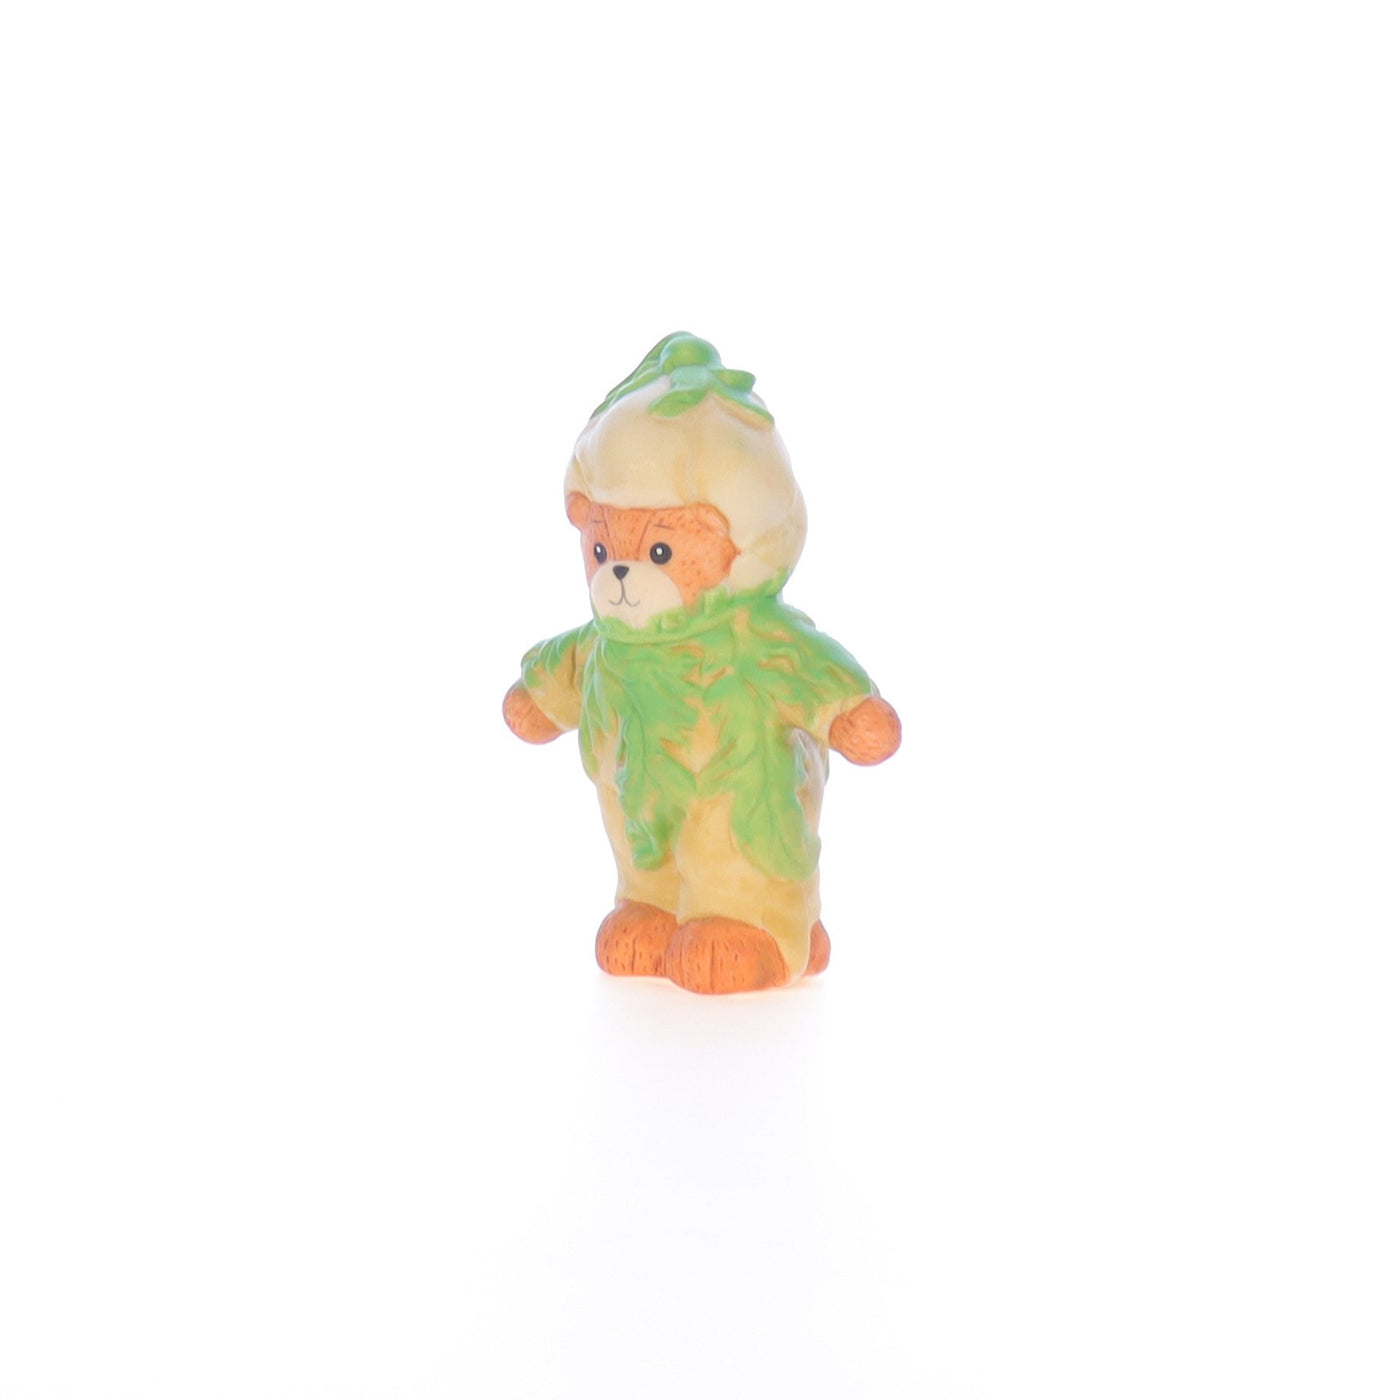 Lucy_And_Me_by_Lucy_Atwell_Porcelain_Figurine_Bear_with_Green_Flower_Costume_Lucy_Unknown_013_02